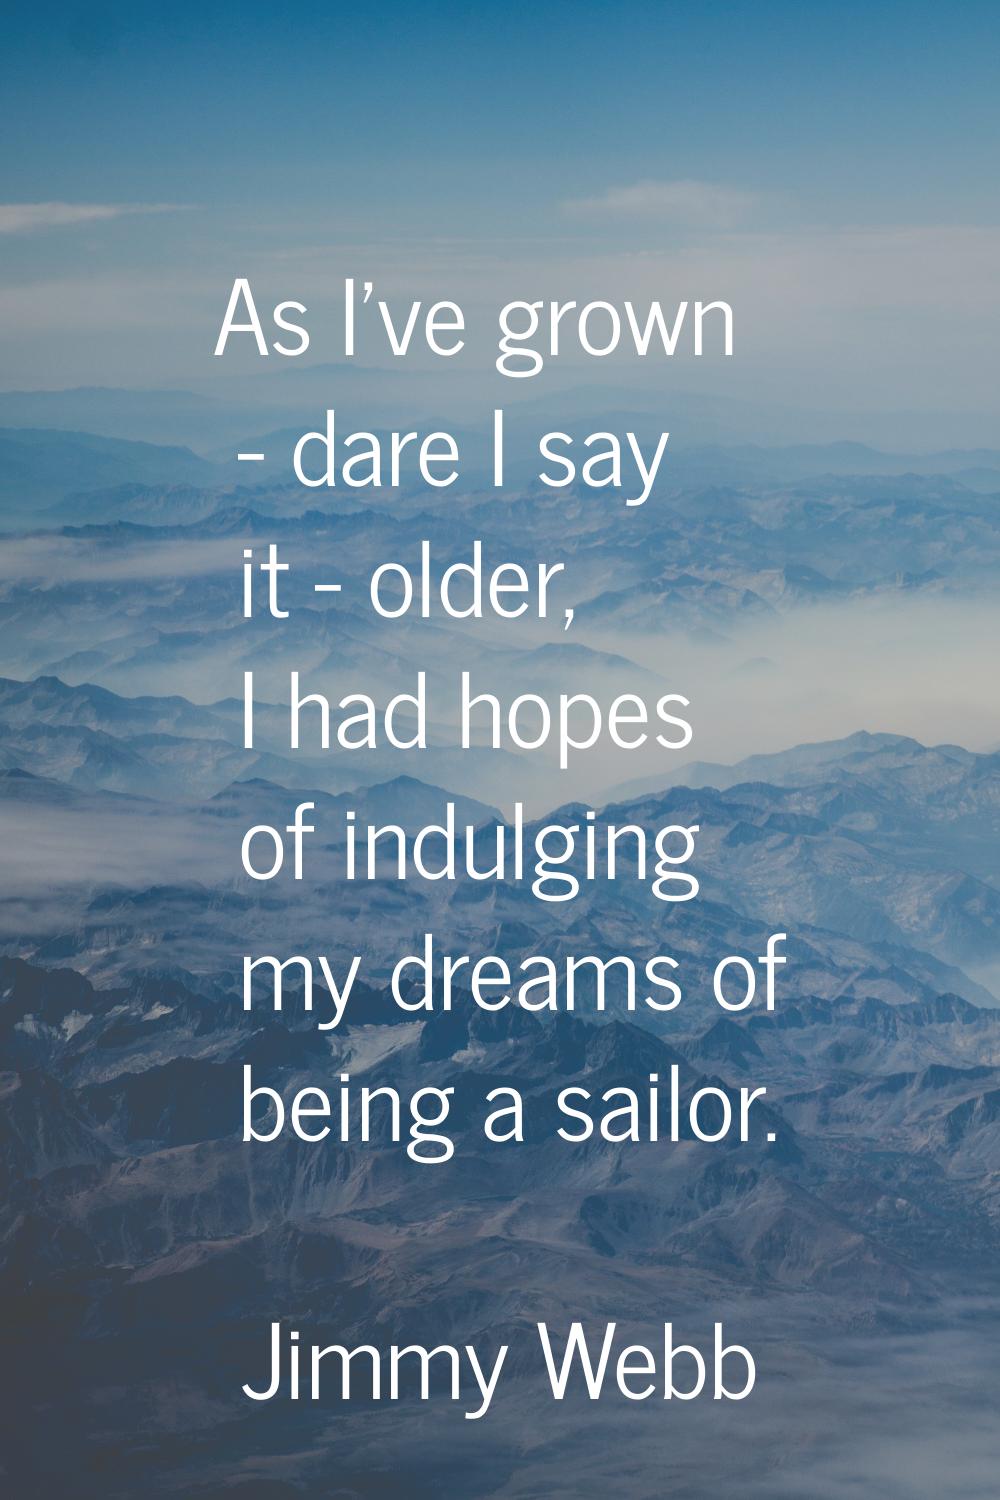 As I've grown - dare I say it - older, I had hopes of indulging my dreams of being a sailor.